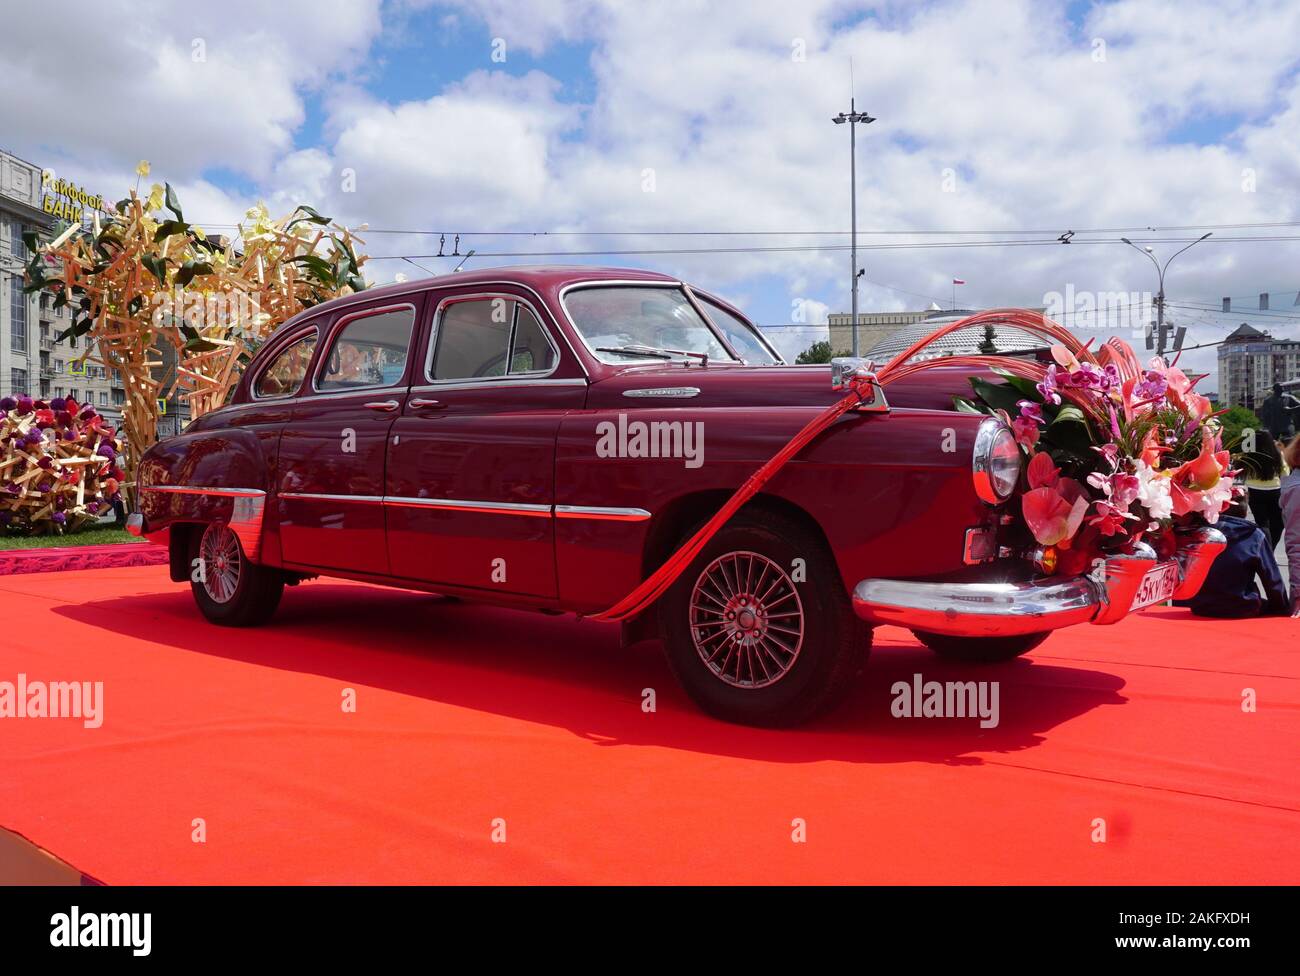 Car Ussr High Resolution Stock Photography and Images - Alamy